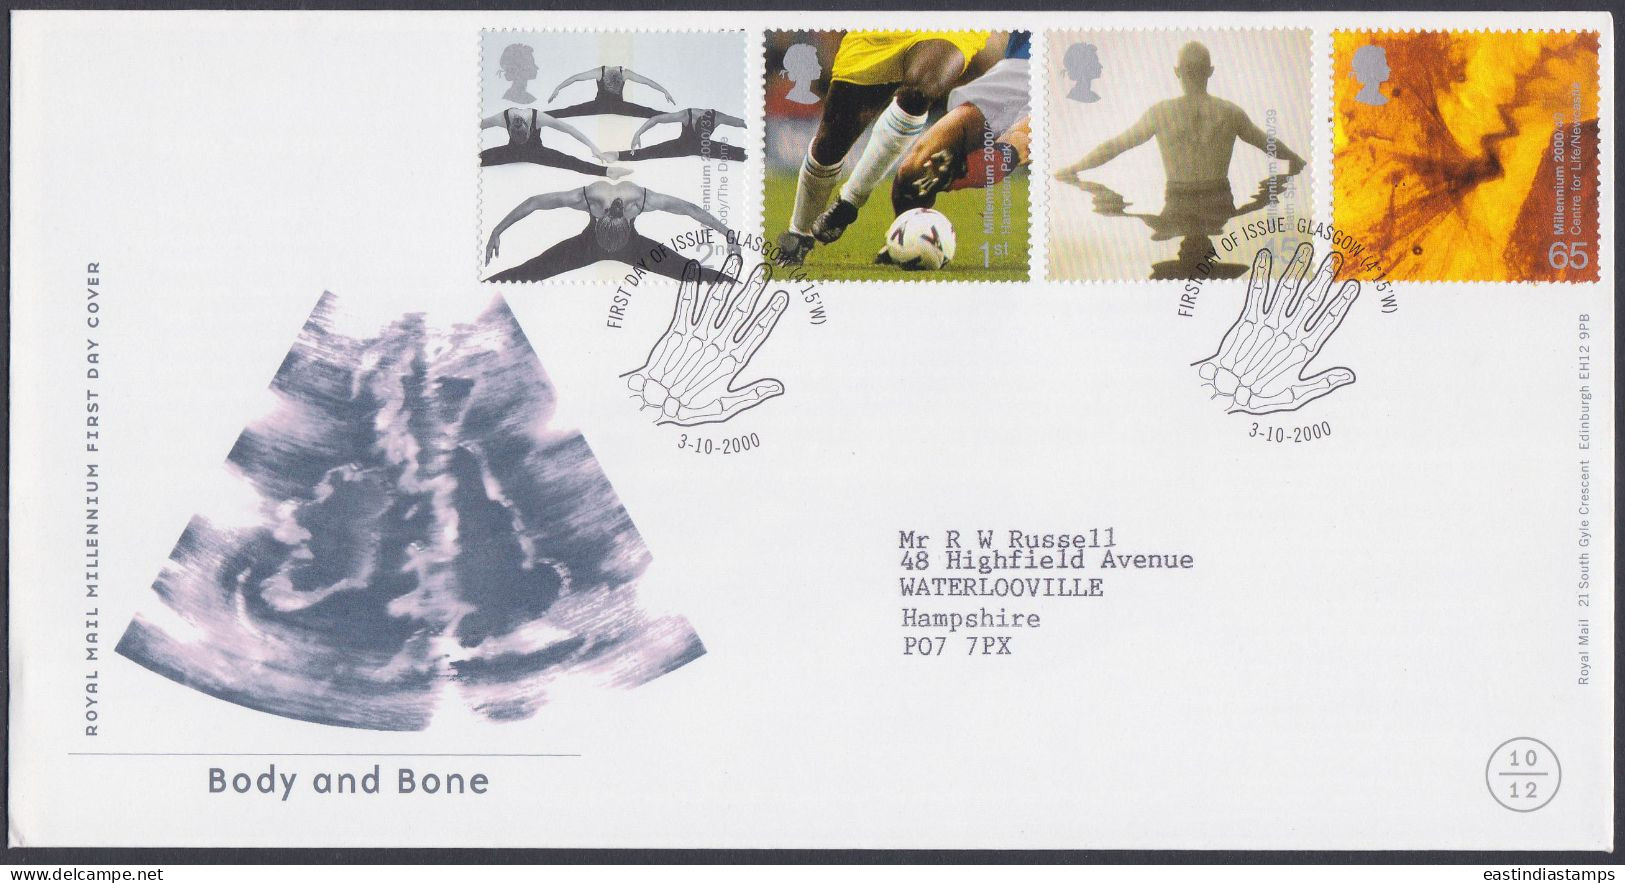 GB Great Britain 2000 FDC Body And Bone, Ultrasound, Football, Gymnastics, Sports, Pictorial Postmark, First Day Cover - Lettres & Documents